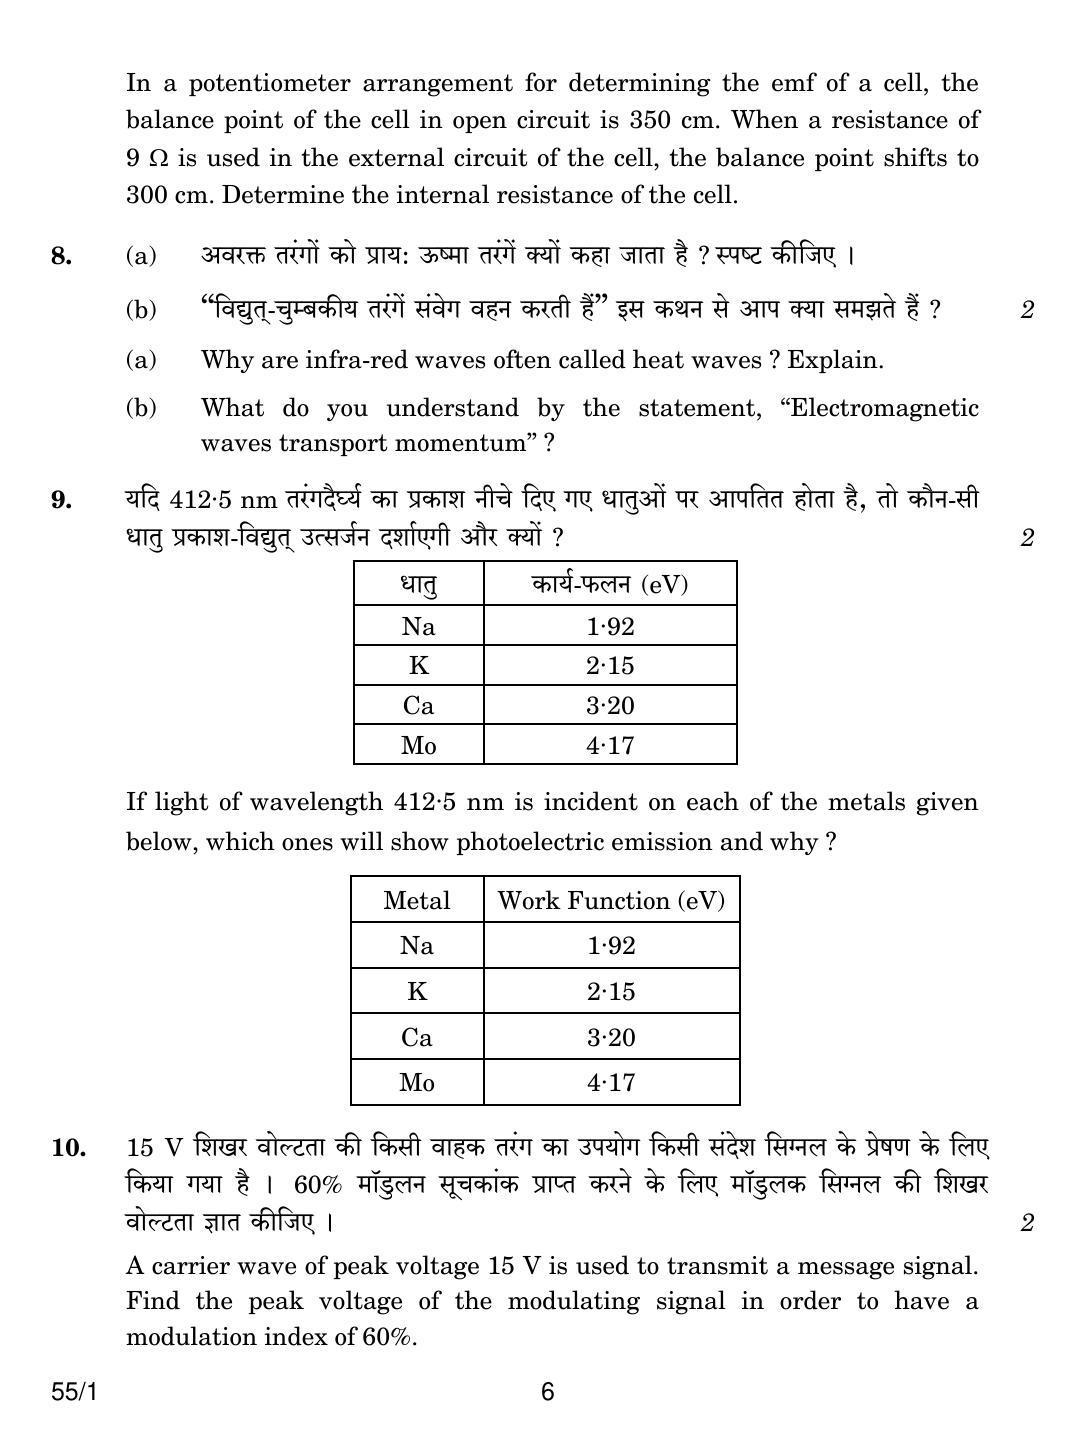 CBSE Class 12 55-1 PHYSICS 2018 Question Paper - Page 6